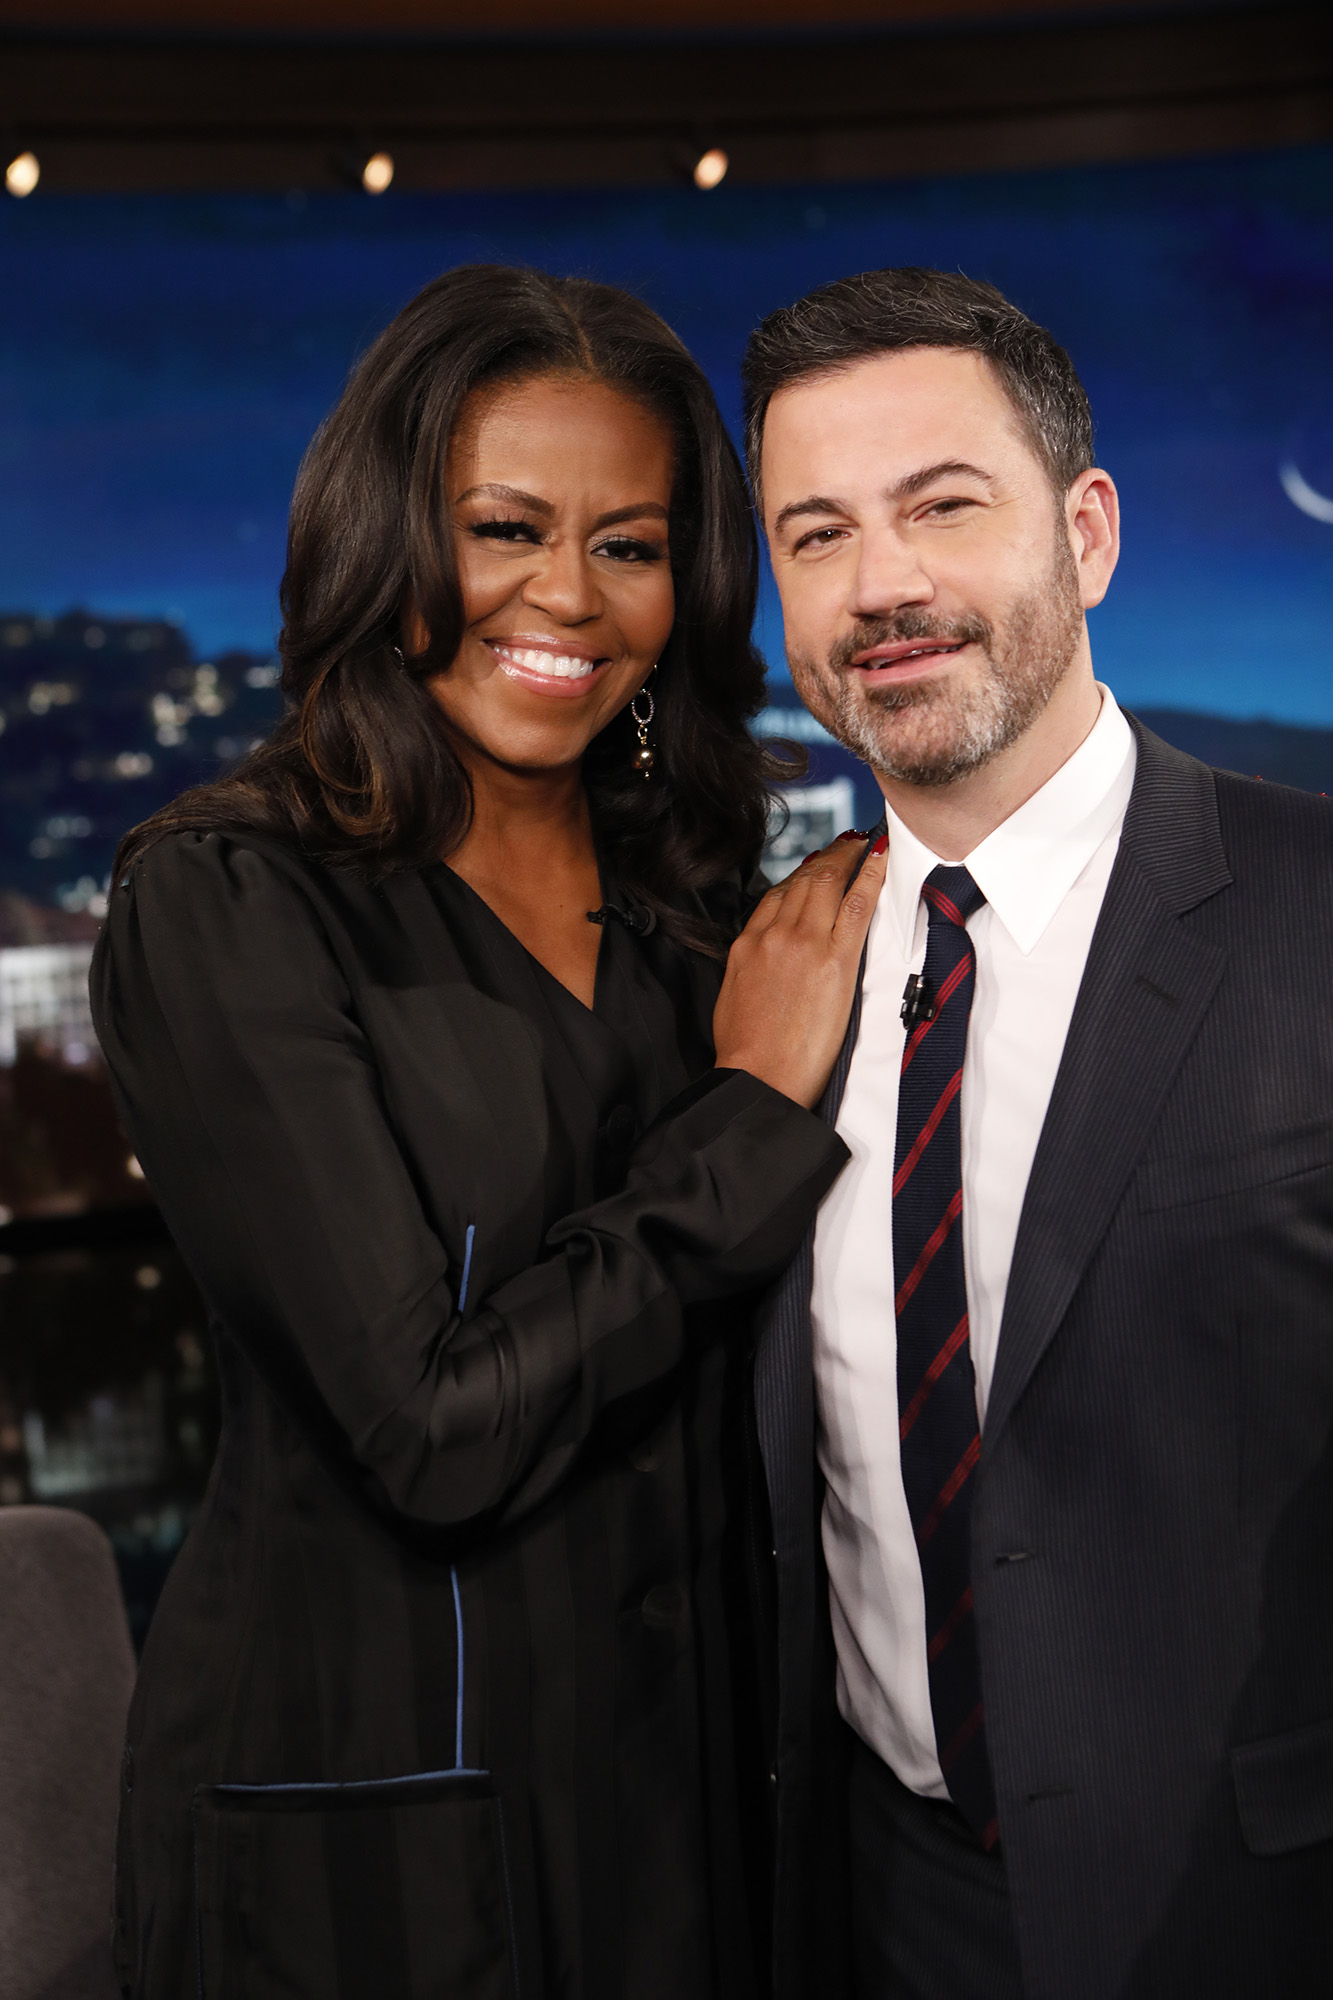 In Case You Missed It: Michelle Obama On Jimmy Kimmel Live